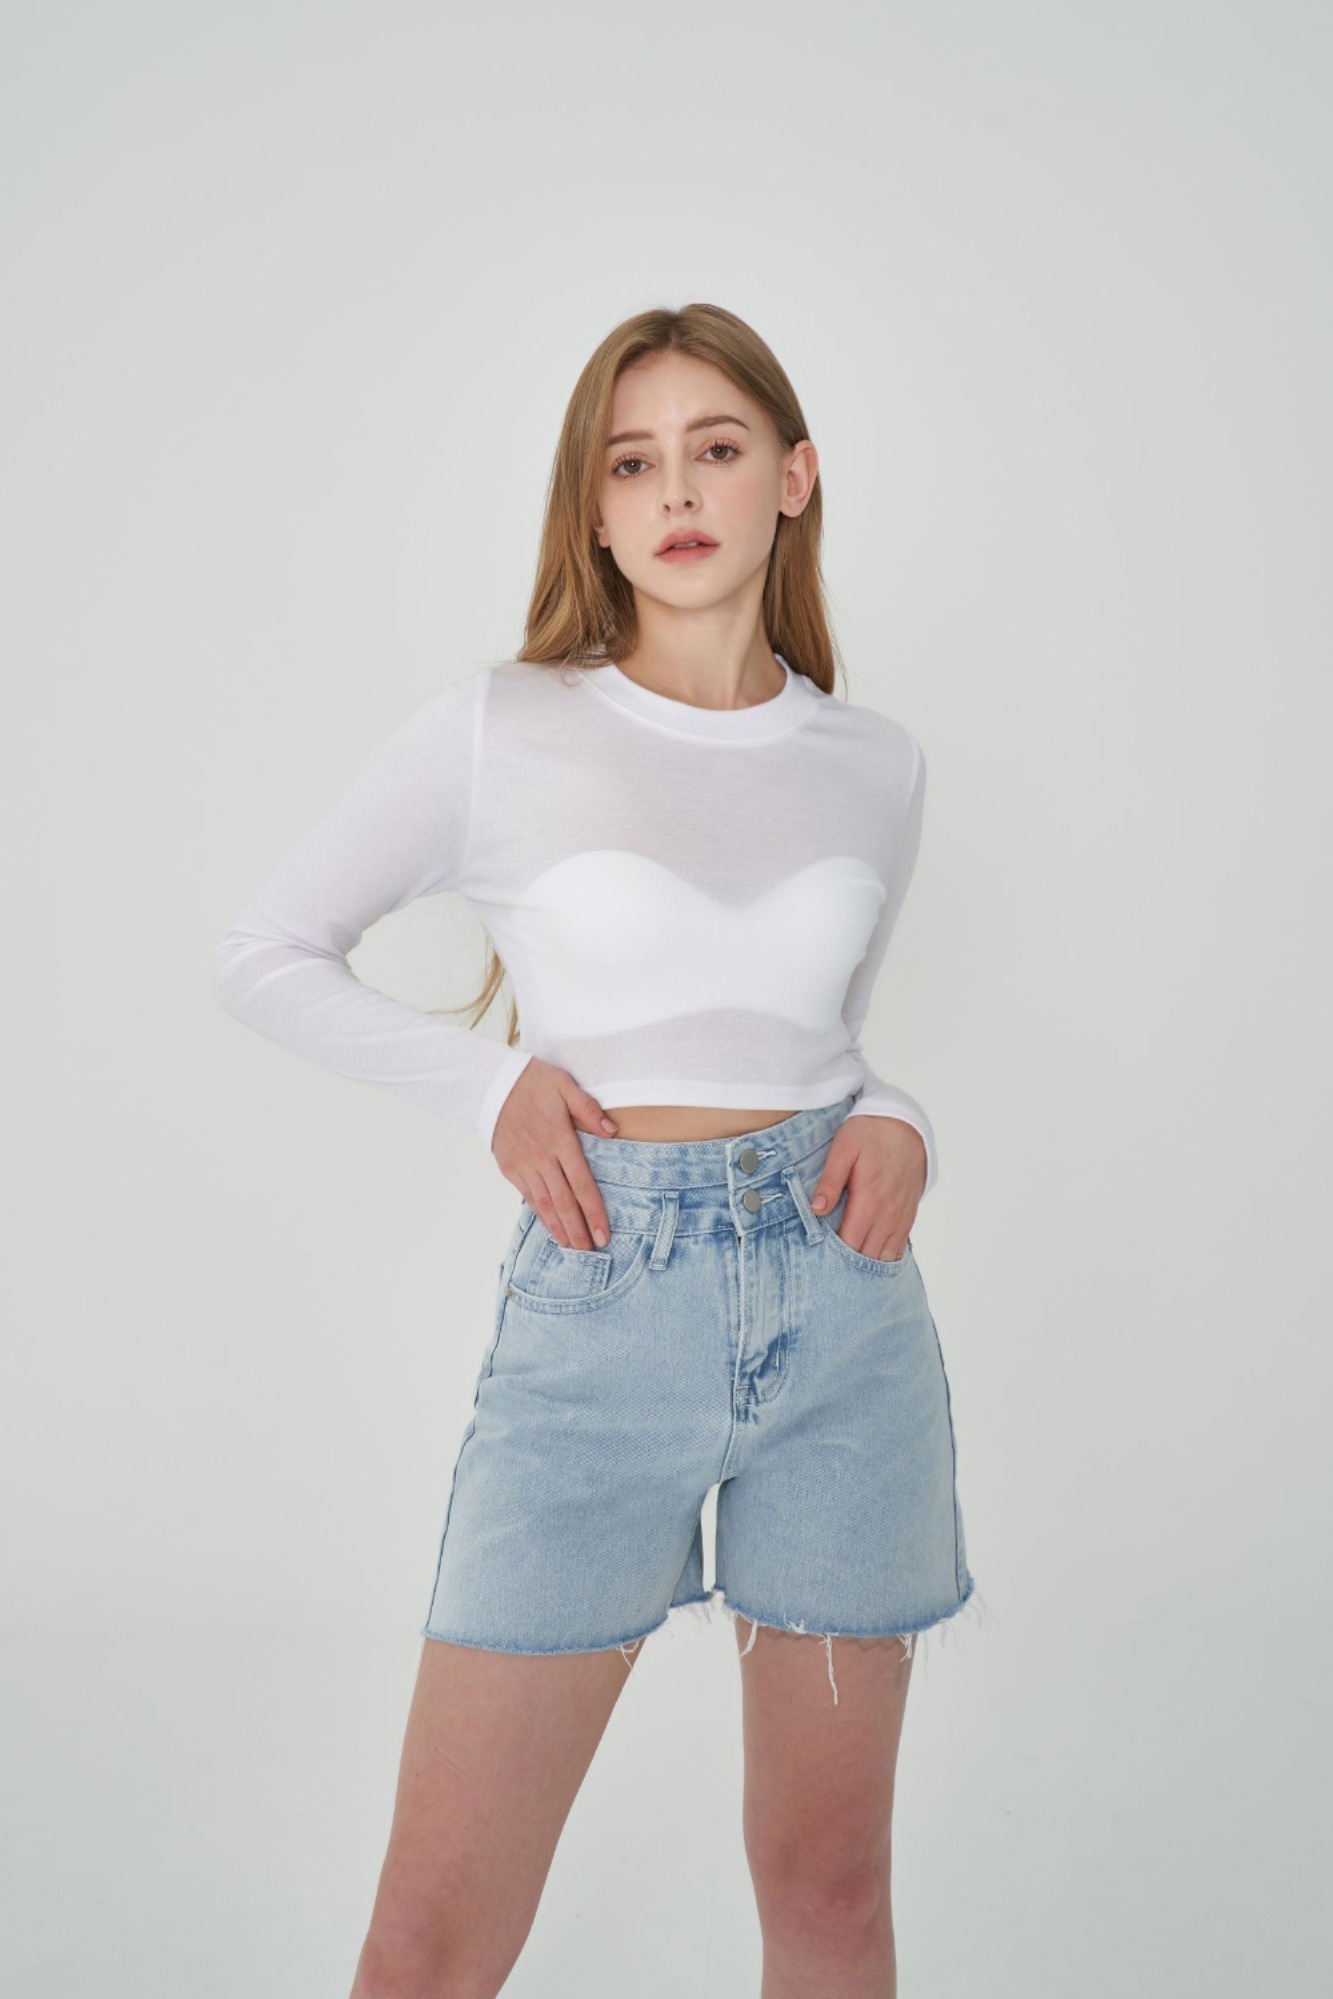 HIGH WAIST FEMININE FIT TWO BUTTON CROPPED PANTS [6856]